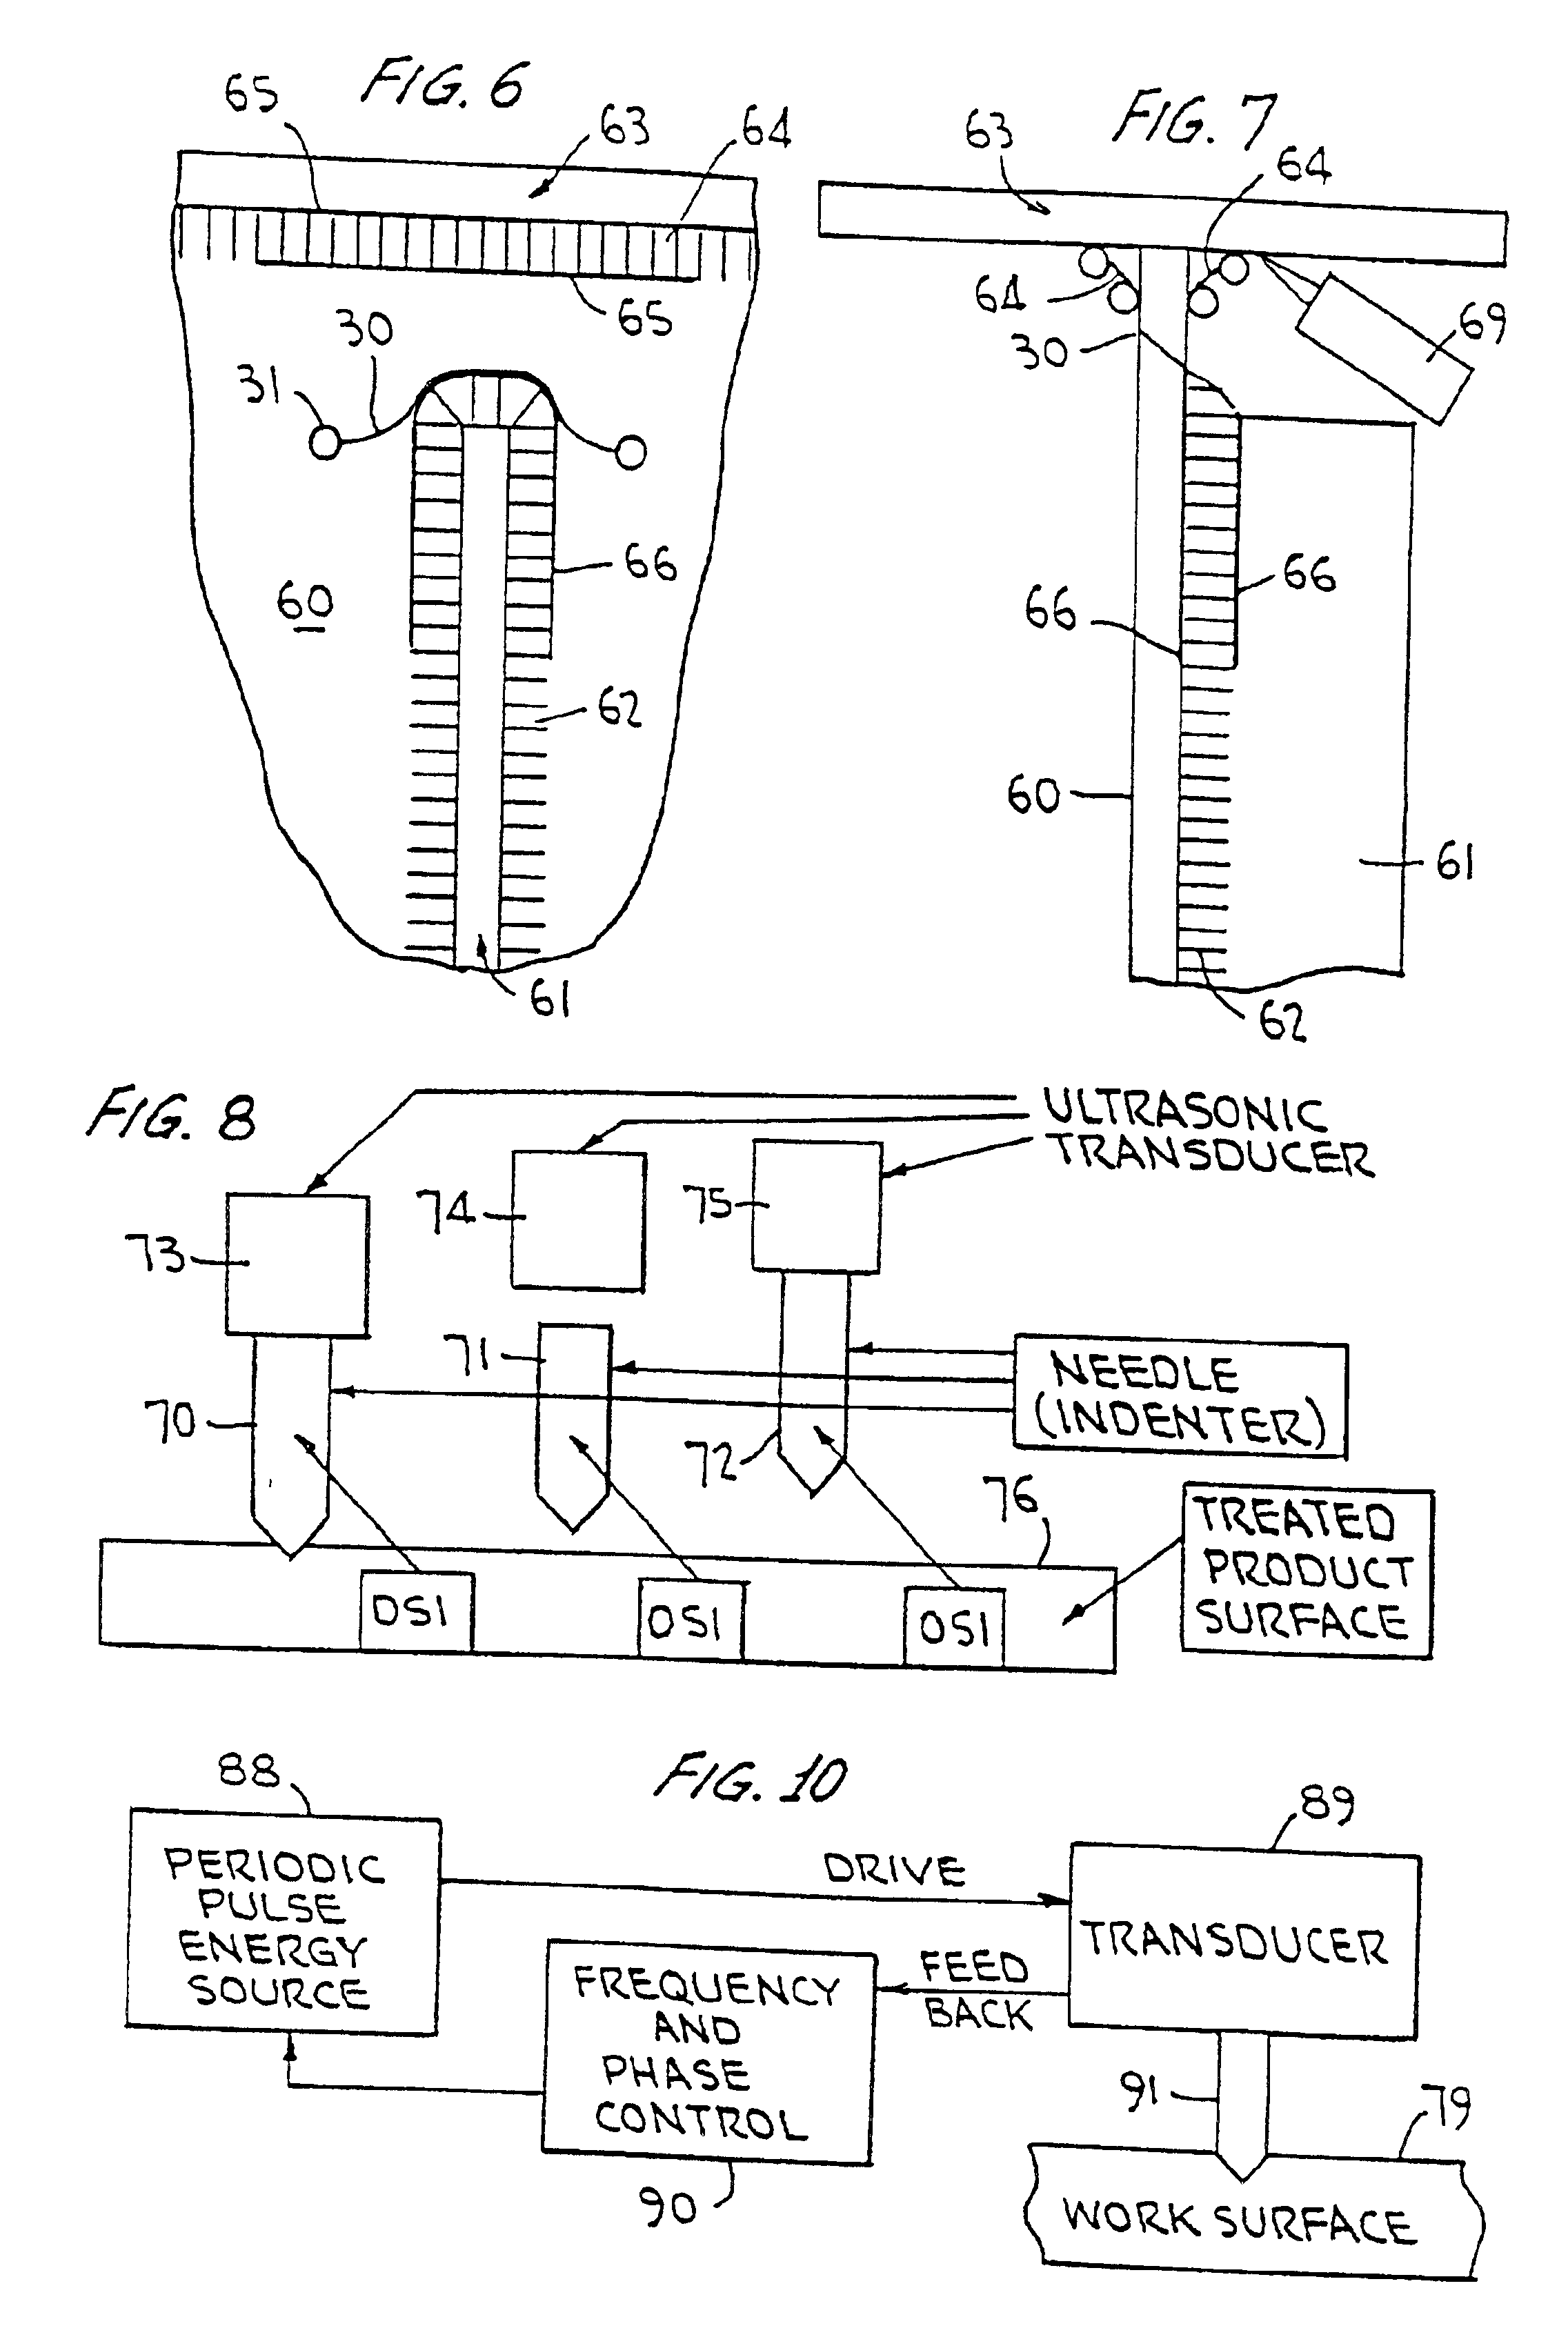 Ultrasonic impact methods for treatment of welded structures